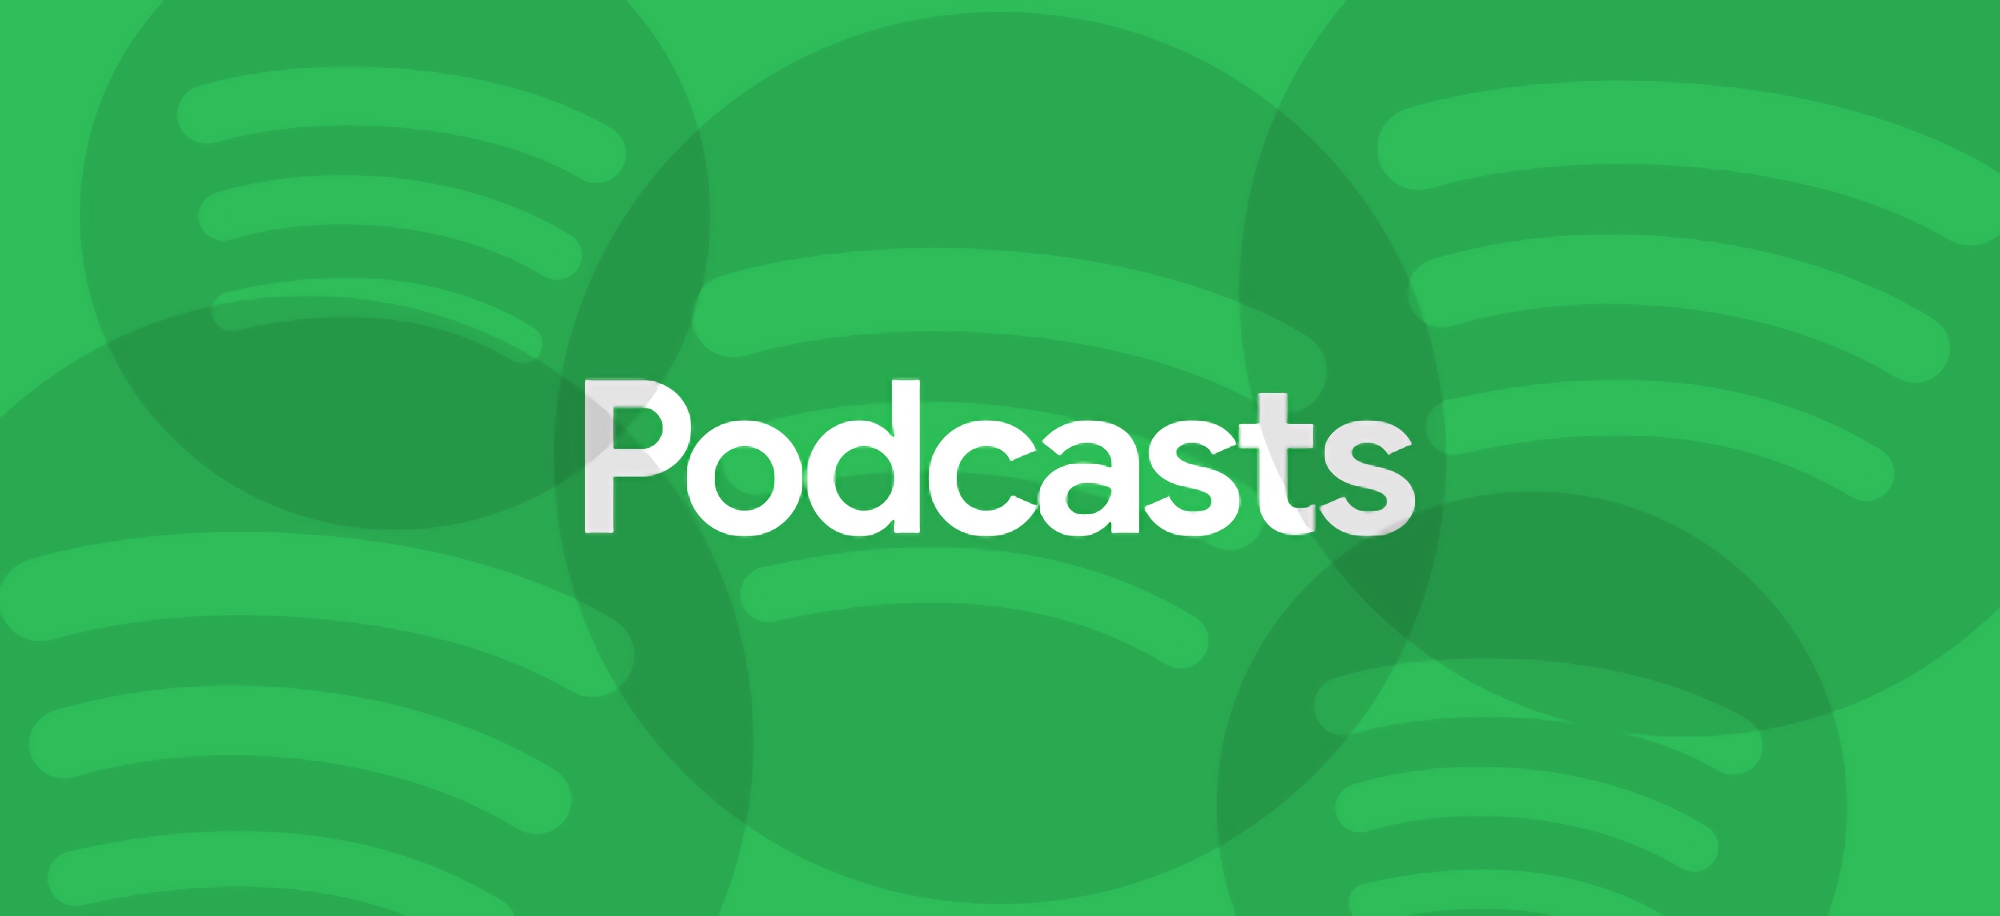 Ukrainian Spotify users have access to podcasts